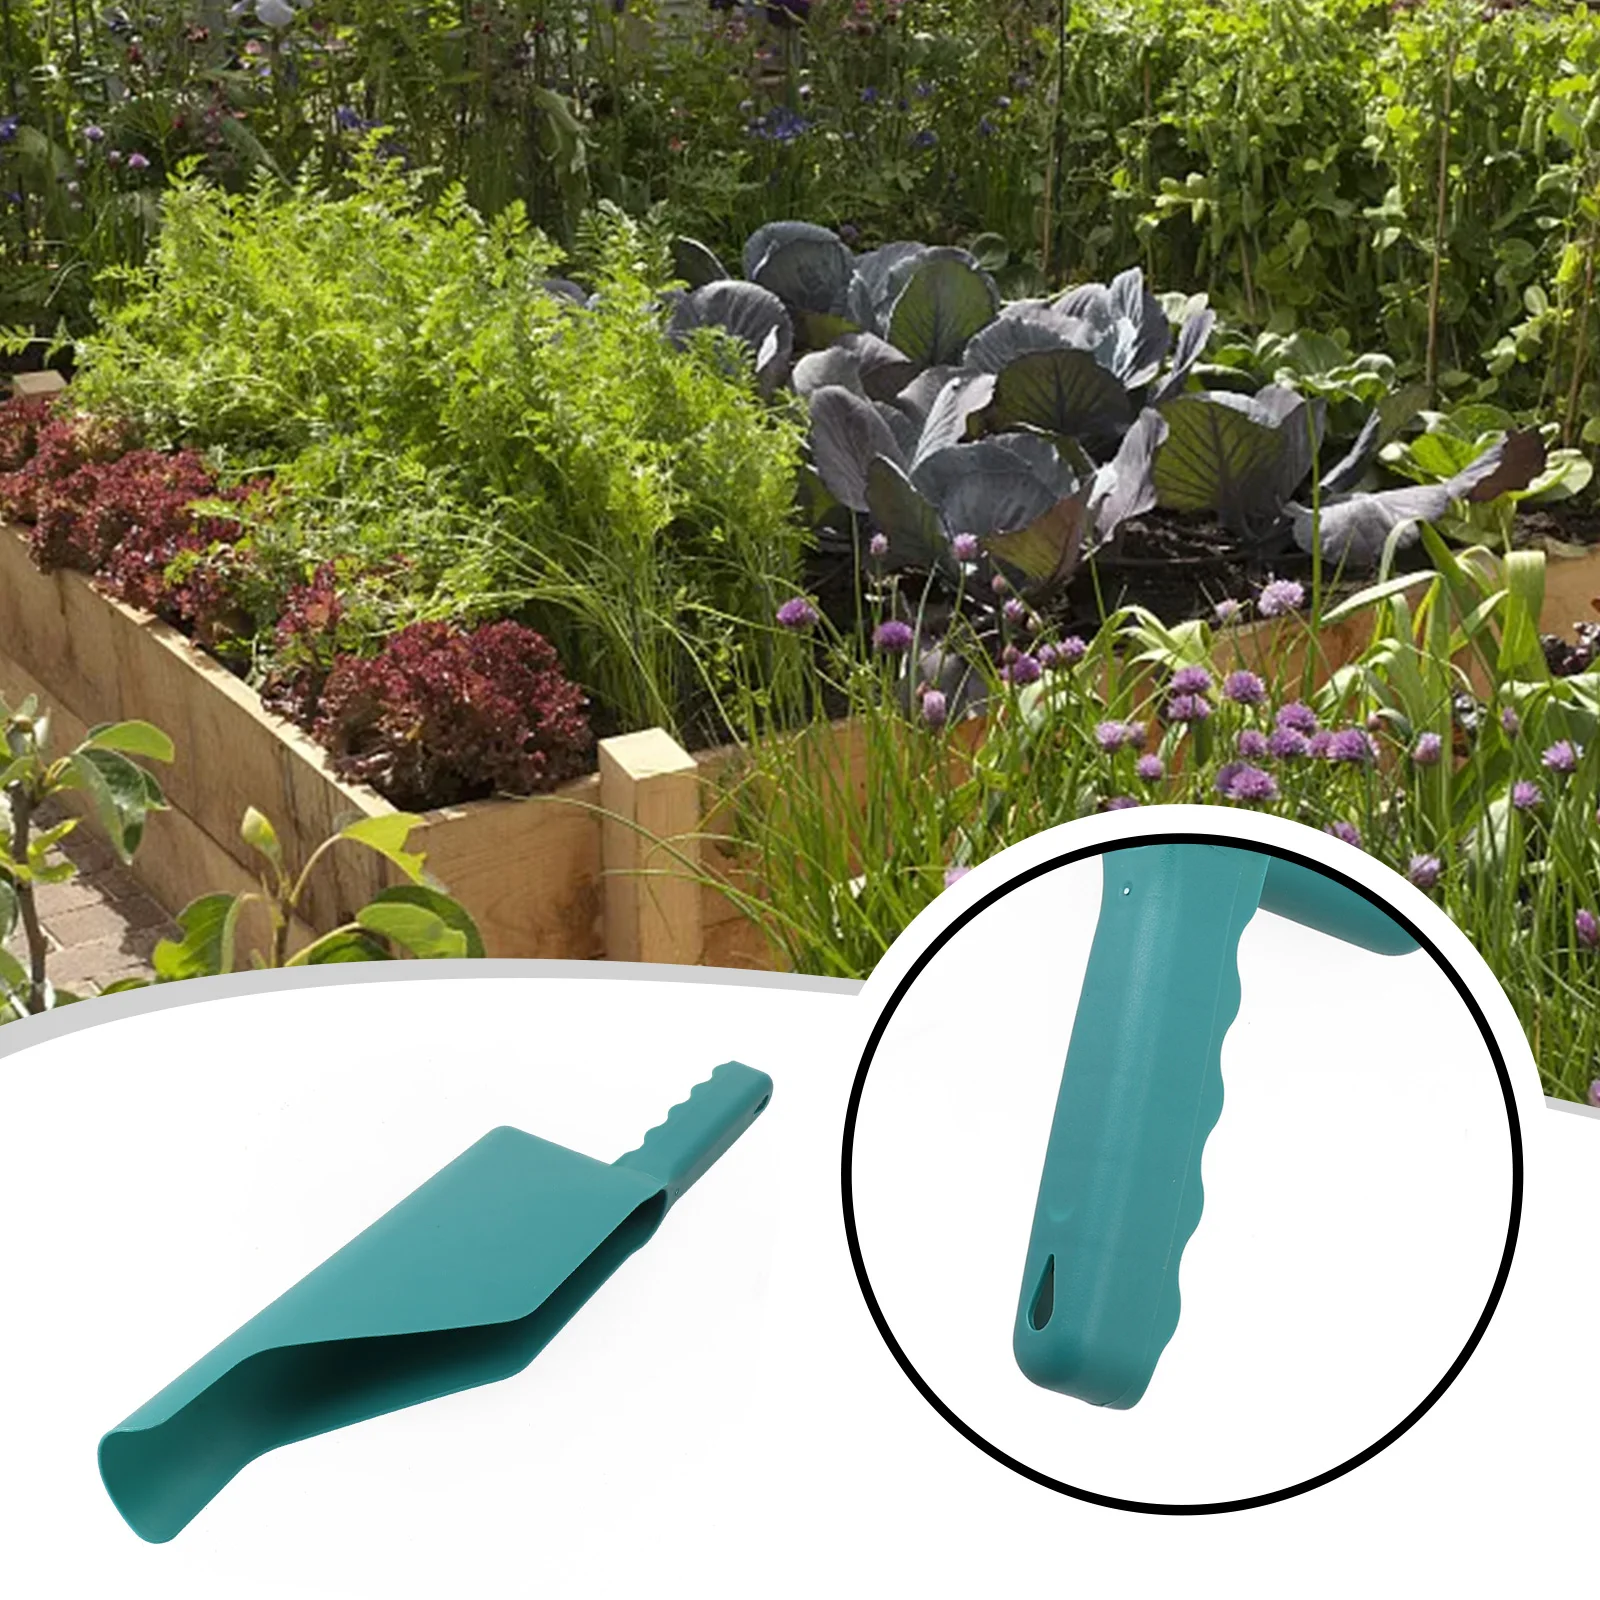 

Scoop Getter Gutter Scoop Cleaning Spoon Ditch Shovel Eave Shovel Garden Tool Gardening Supplies Cleaning Roof Tool